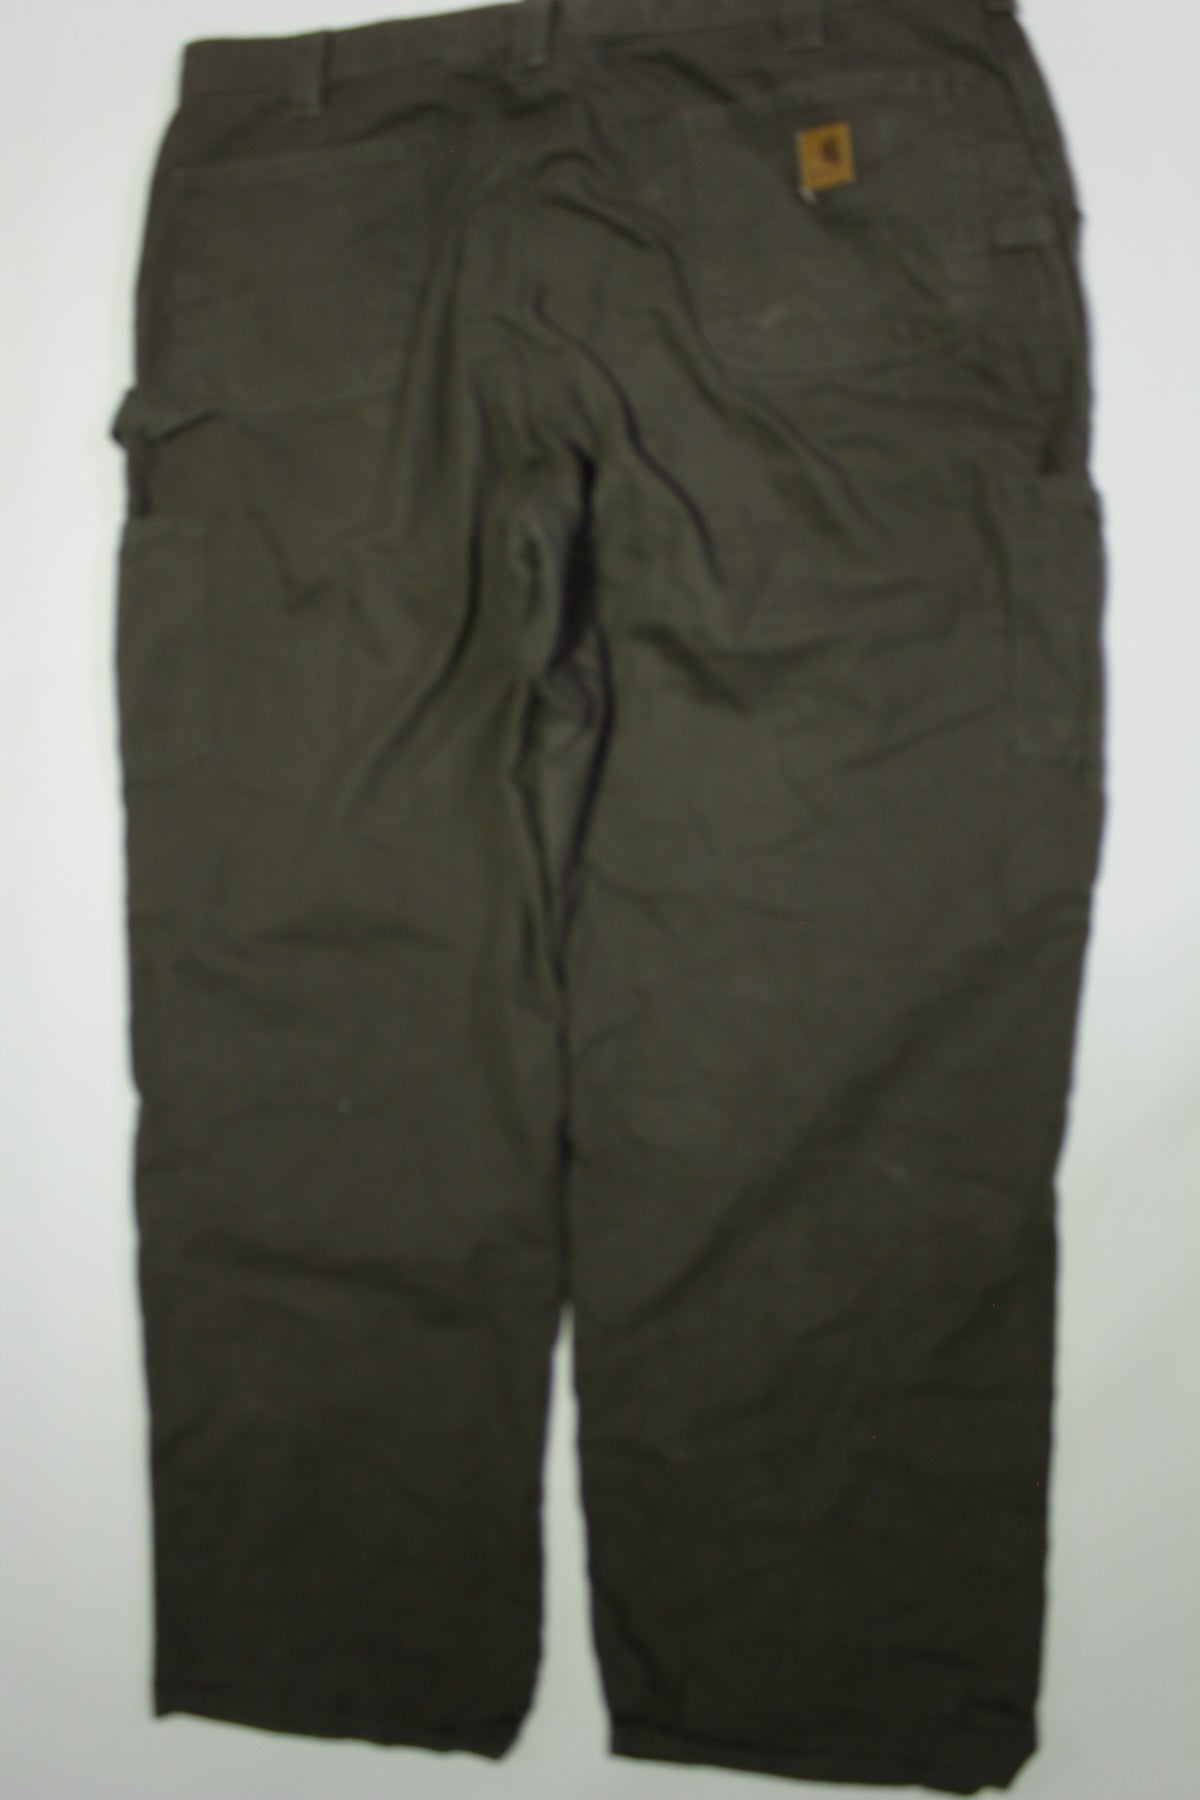 Carhartt B151 LBR Dungaree Fit Duck Wash Utility Pocket Work Construction Pants